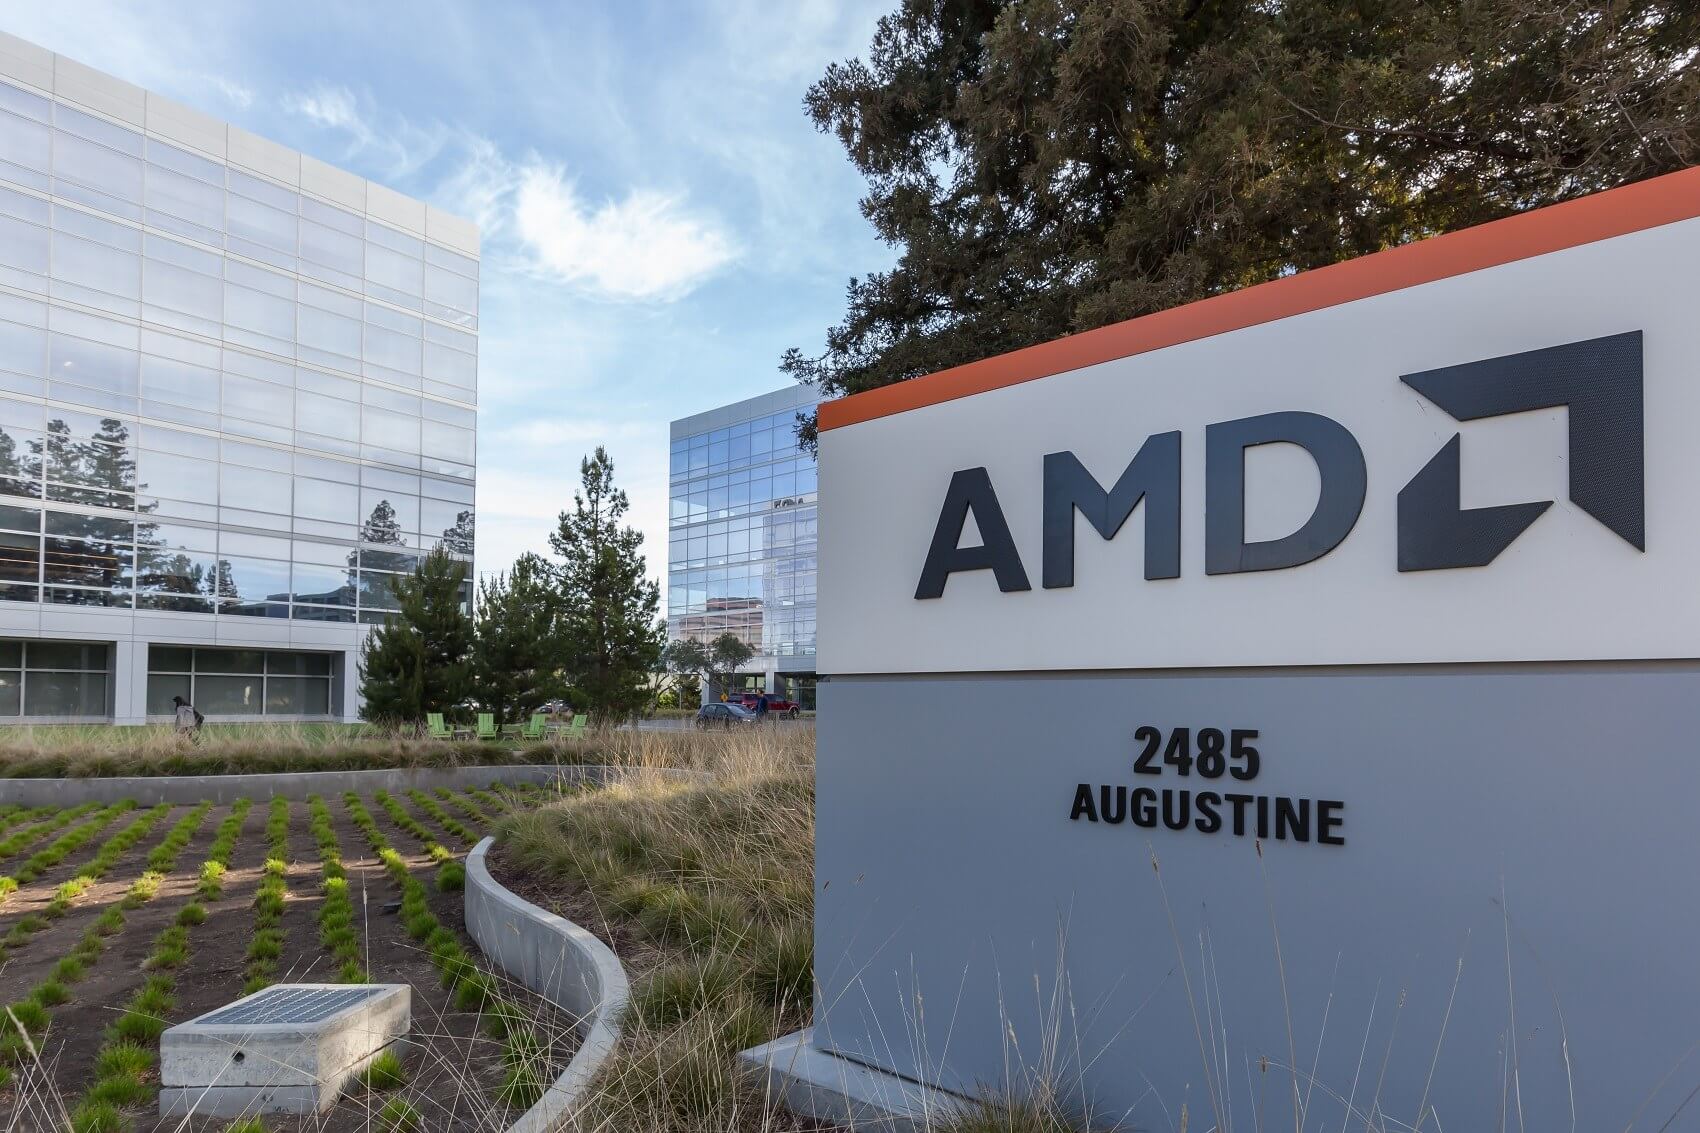 AMD will pay buyers of its Bulldozer and Piledriver CPUs up to $300